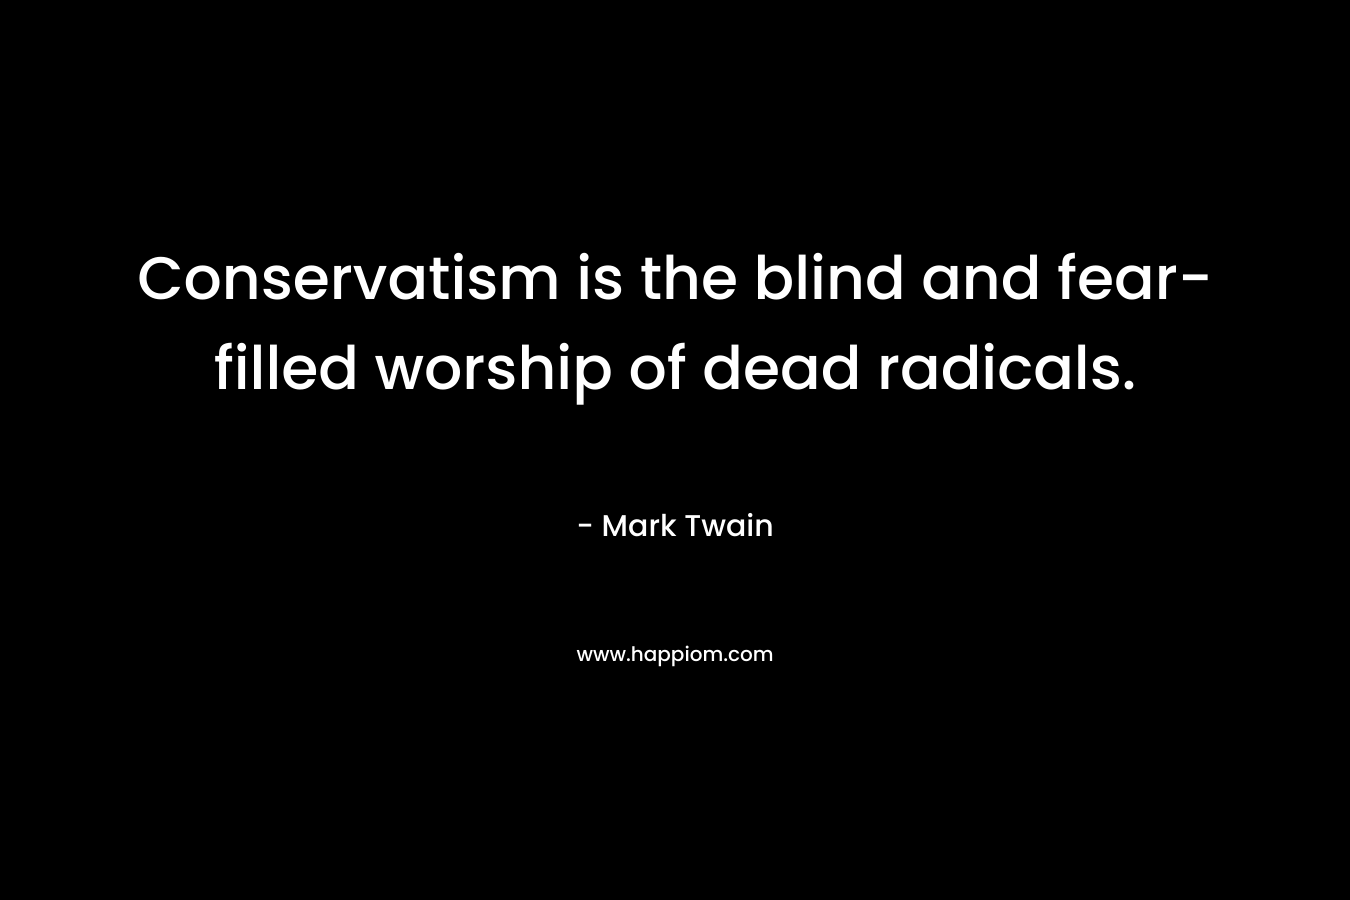 Conservatism is the blind and fear-filled worship of dead radicals. – Mark Twain